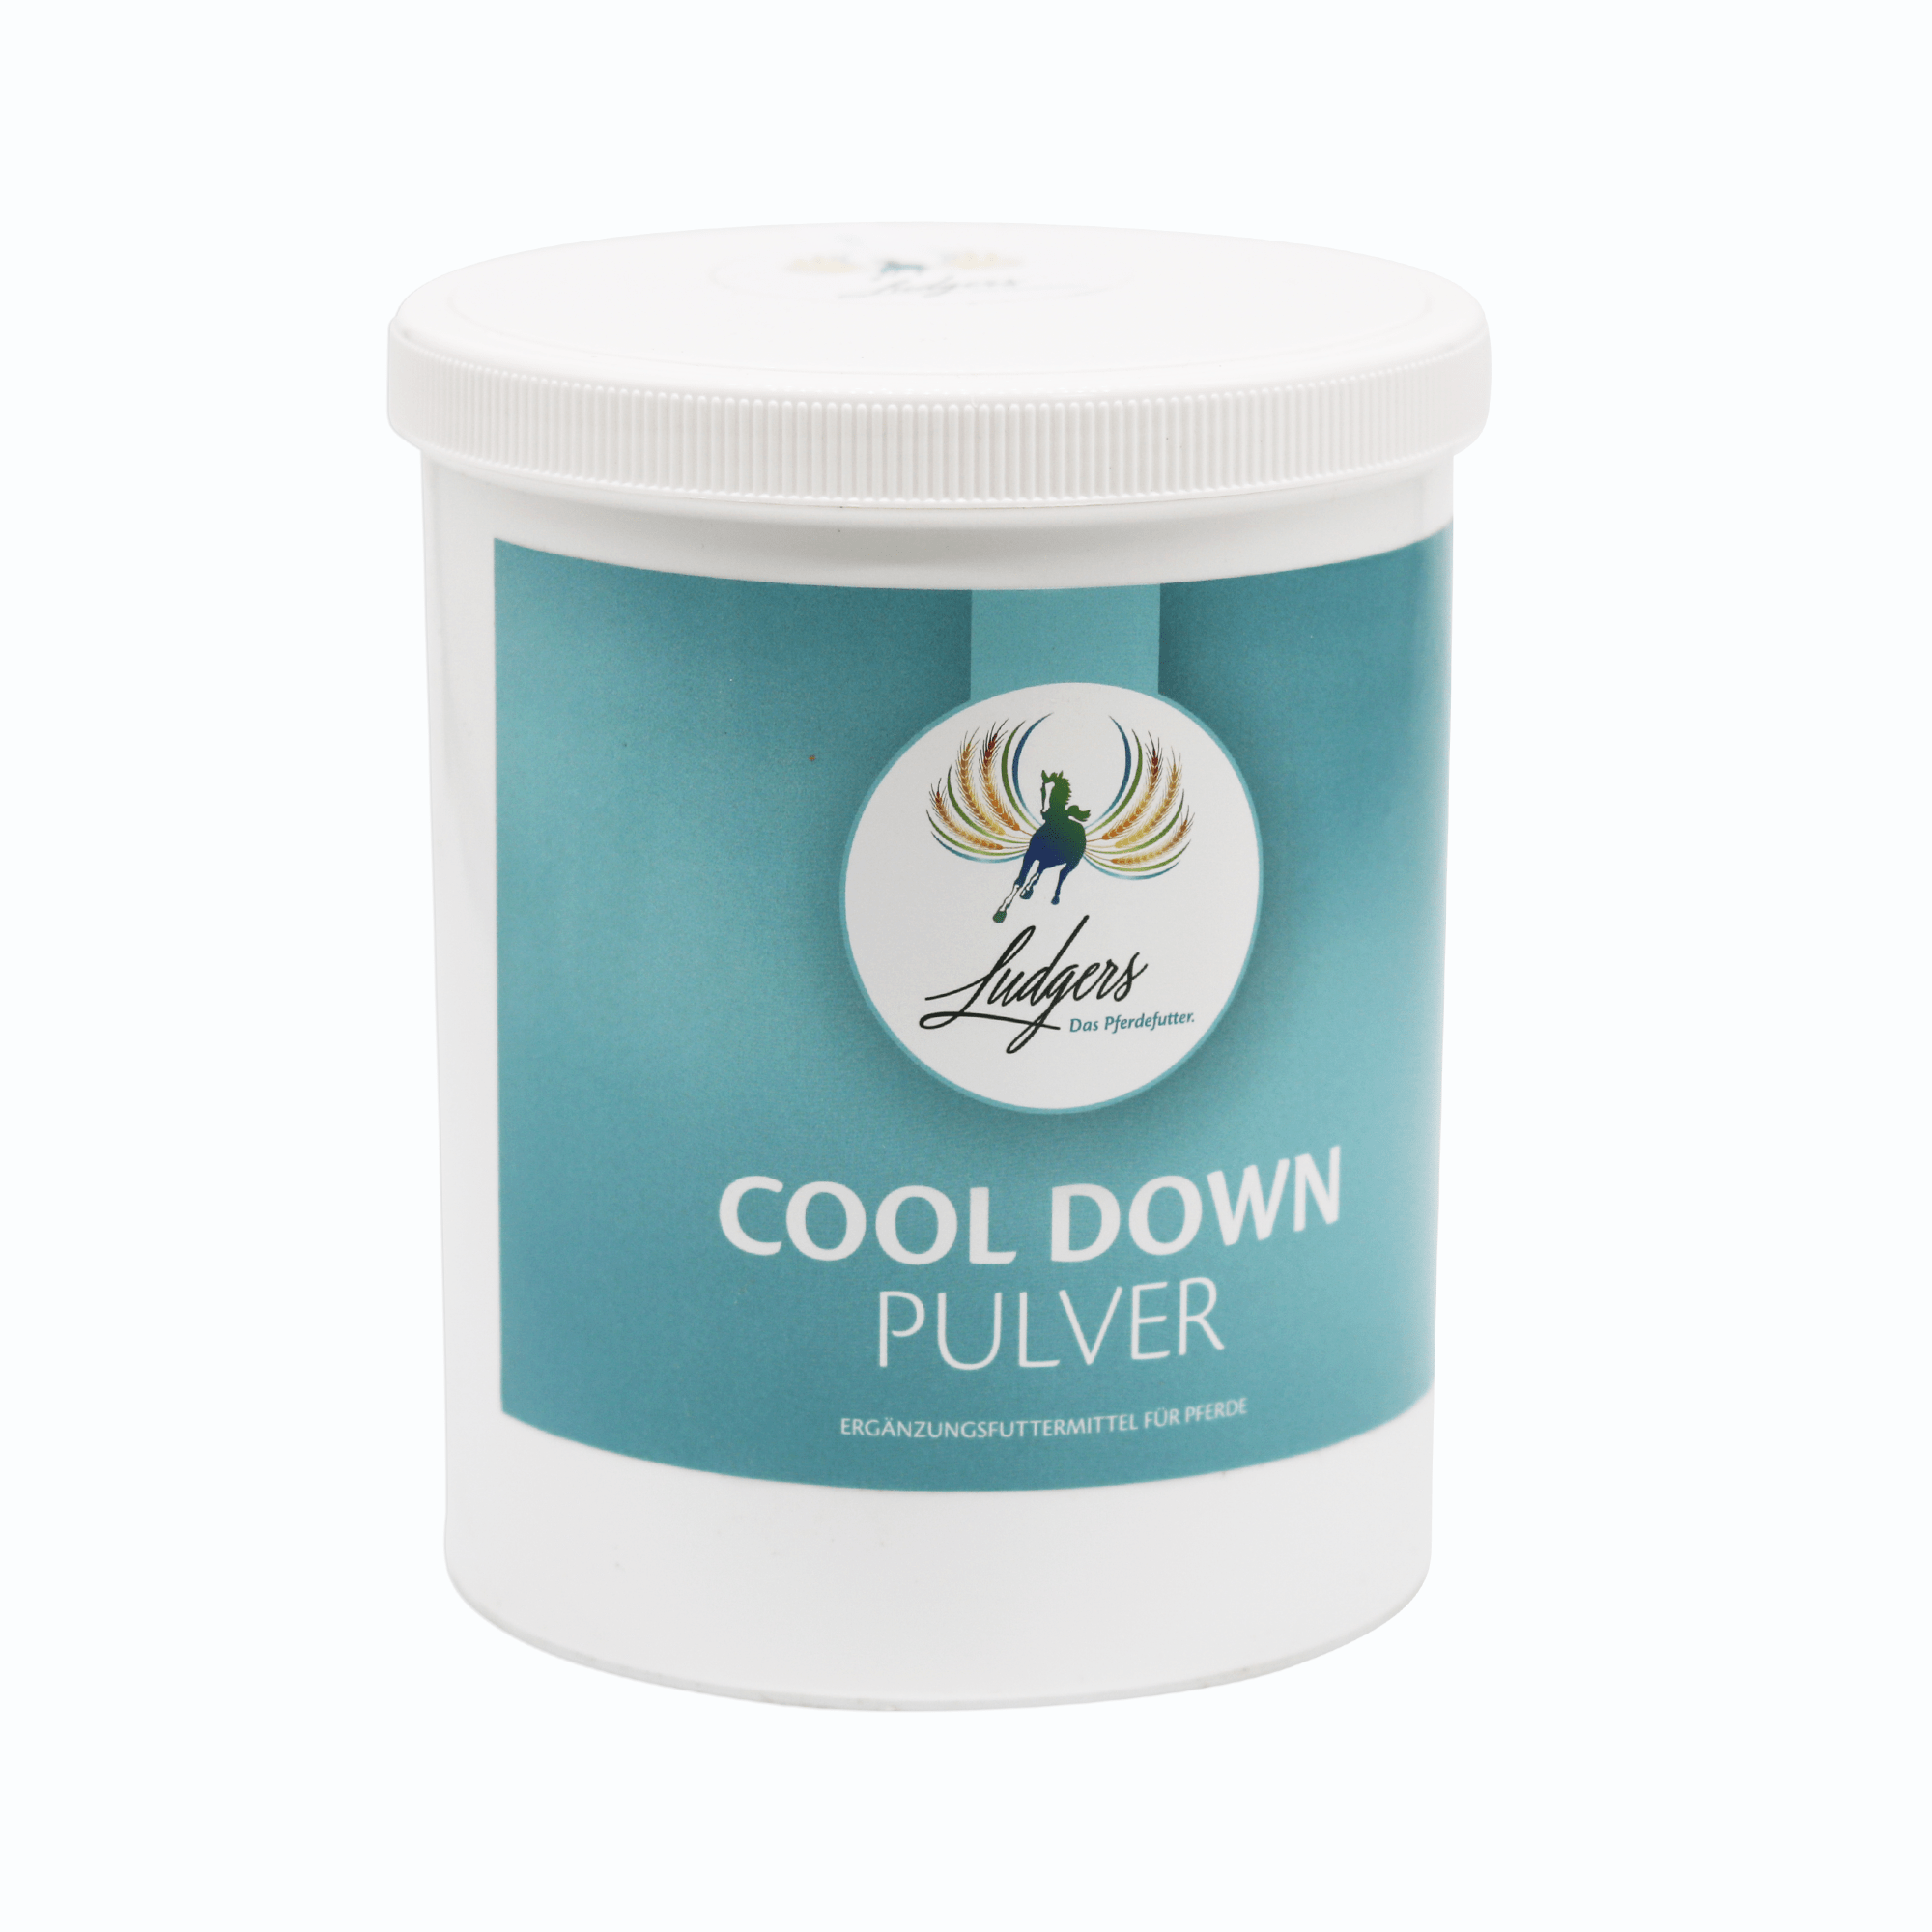 COOL DOWN | PULVER